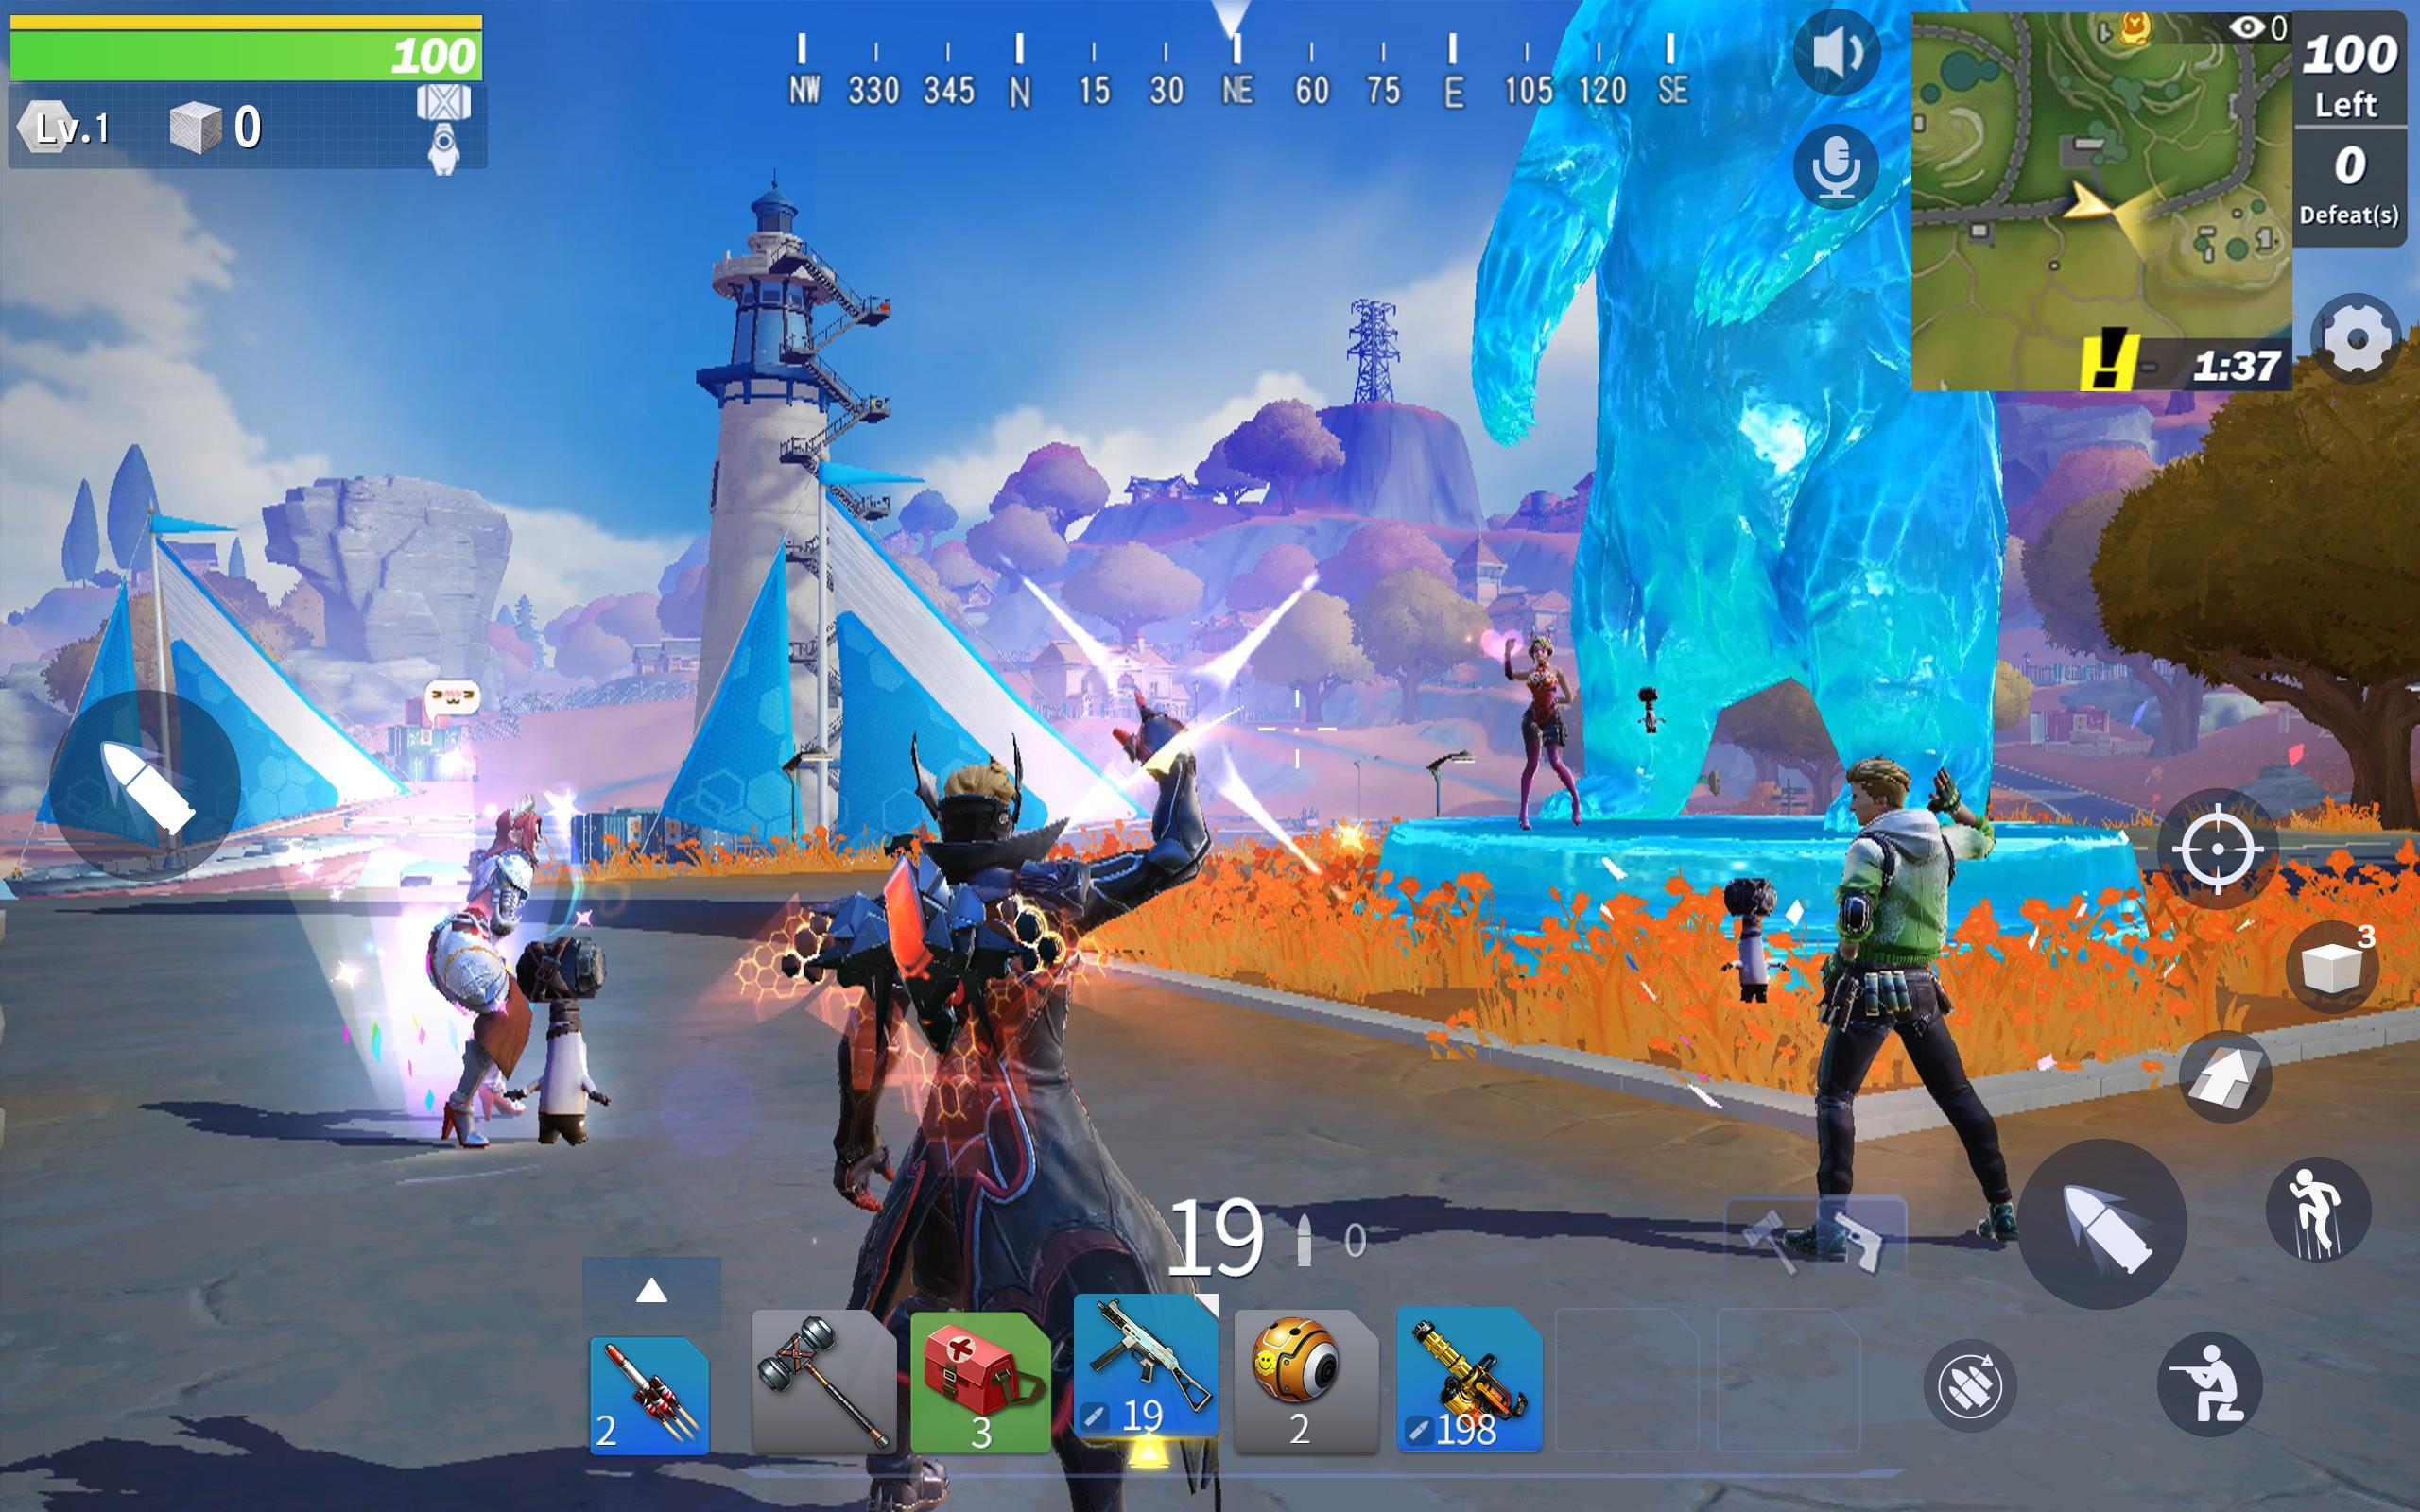 Creative Destruction For Android Apk Download - download robloxapk for android apk s